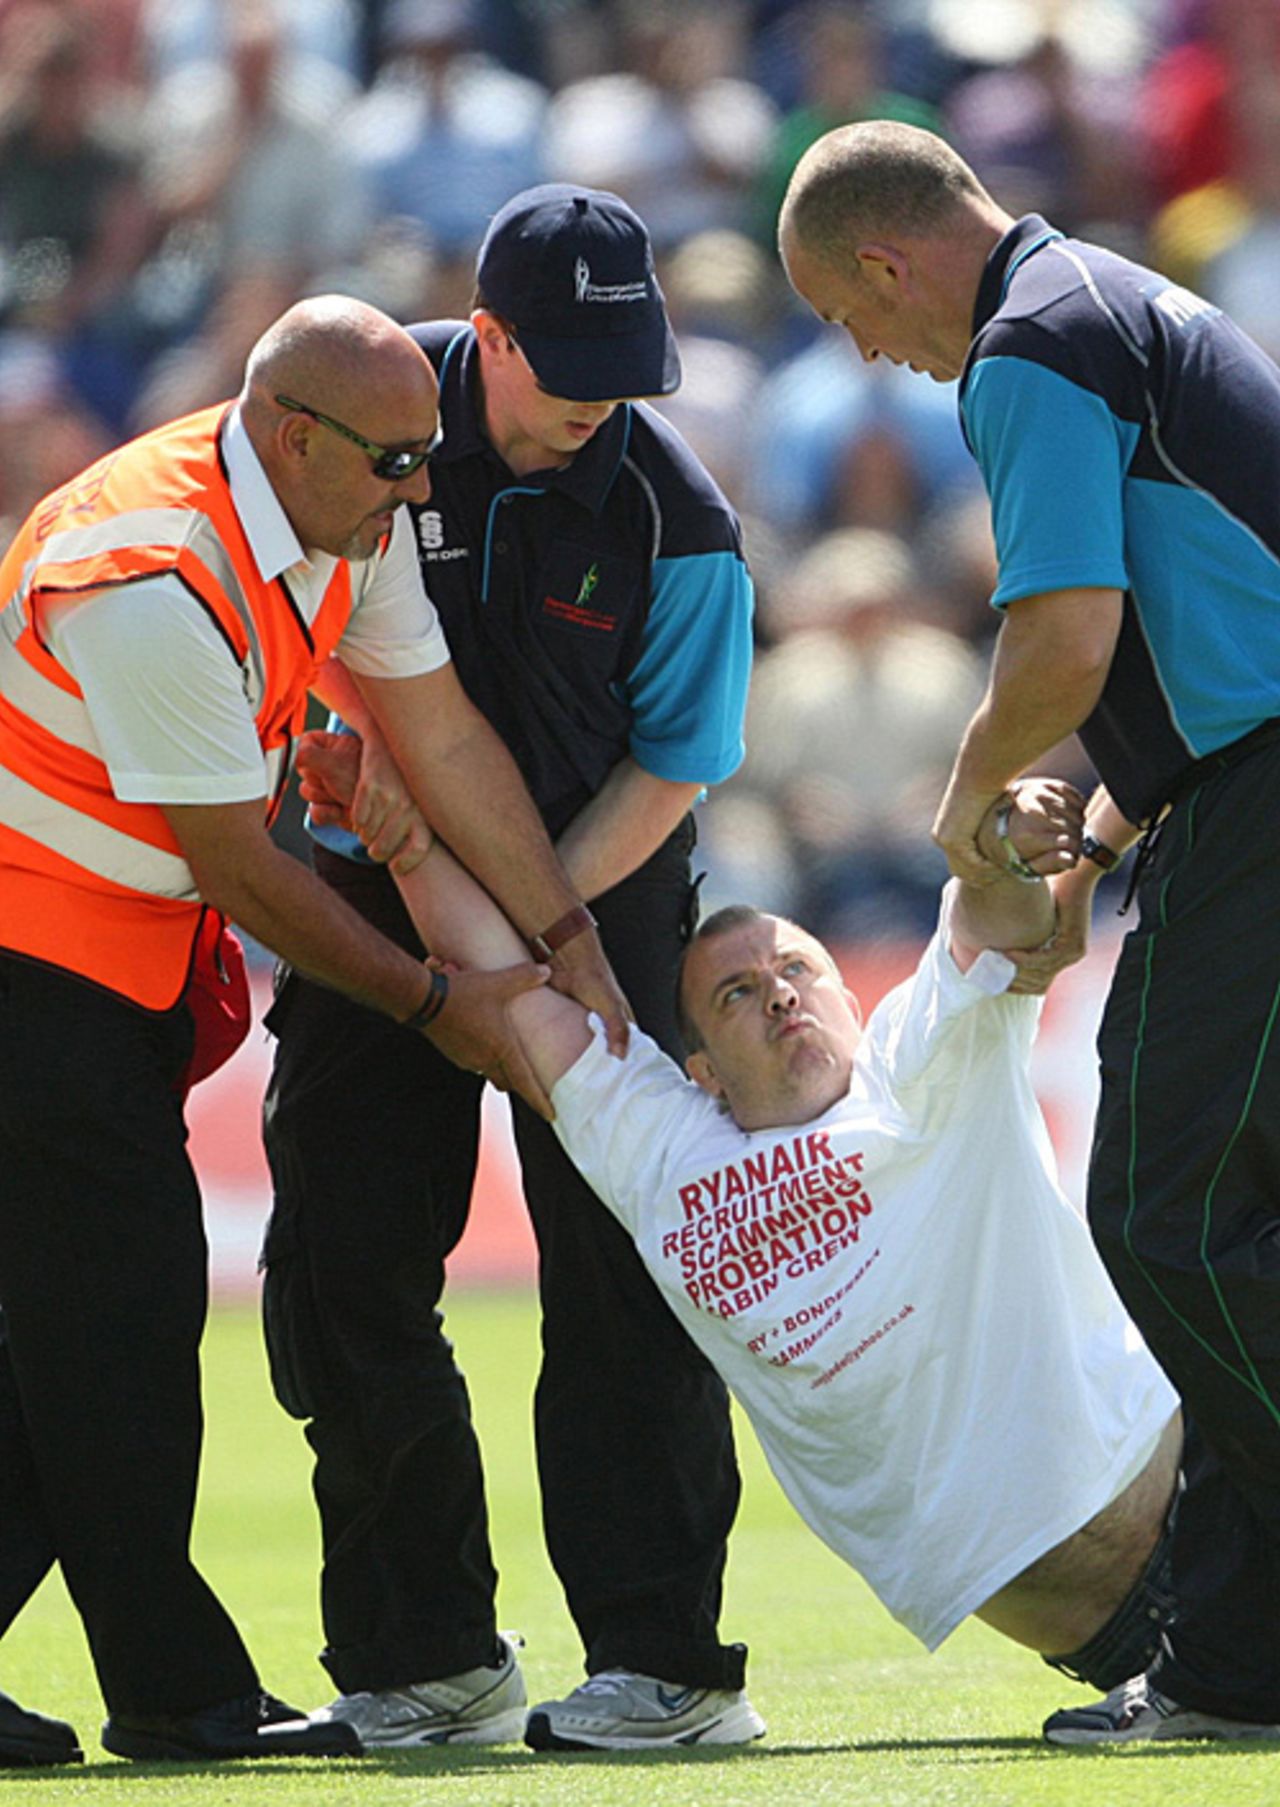 A man protesting against the recruitment policies of an airline is dragged off the Cardiff pitch, England v Australia, 1st Test, Cardiff, 5th day, July 12, 2009